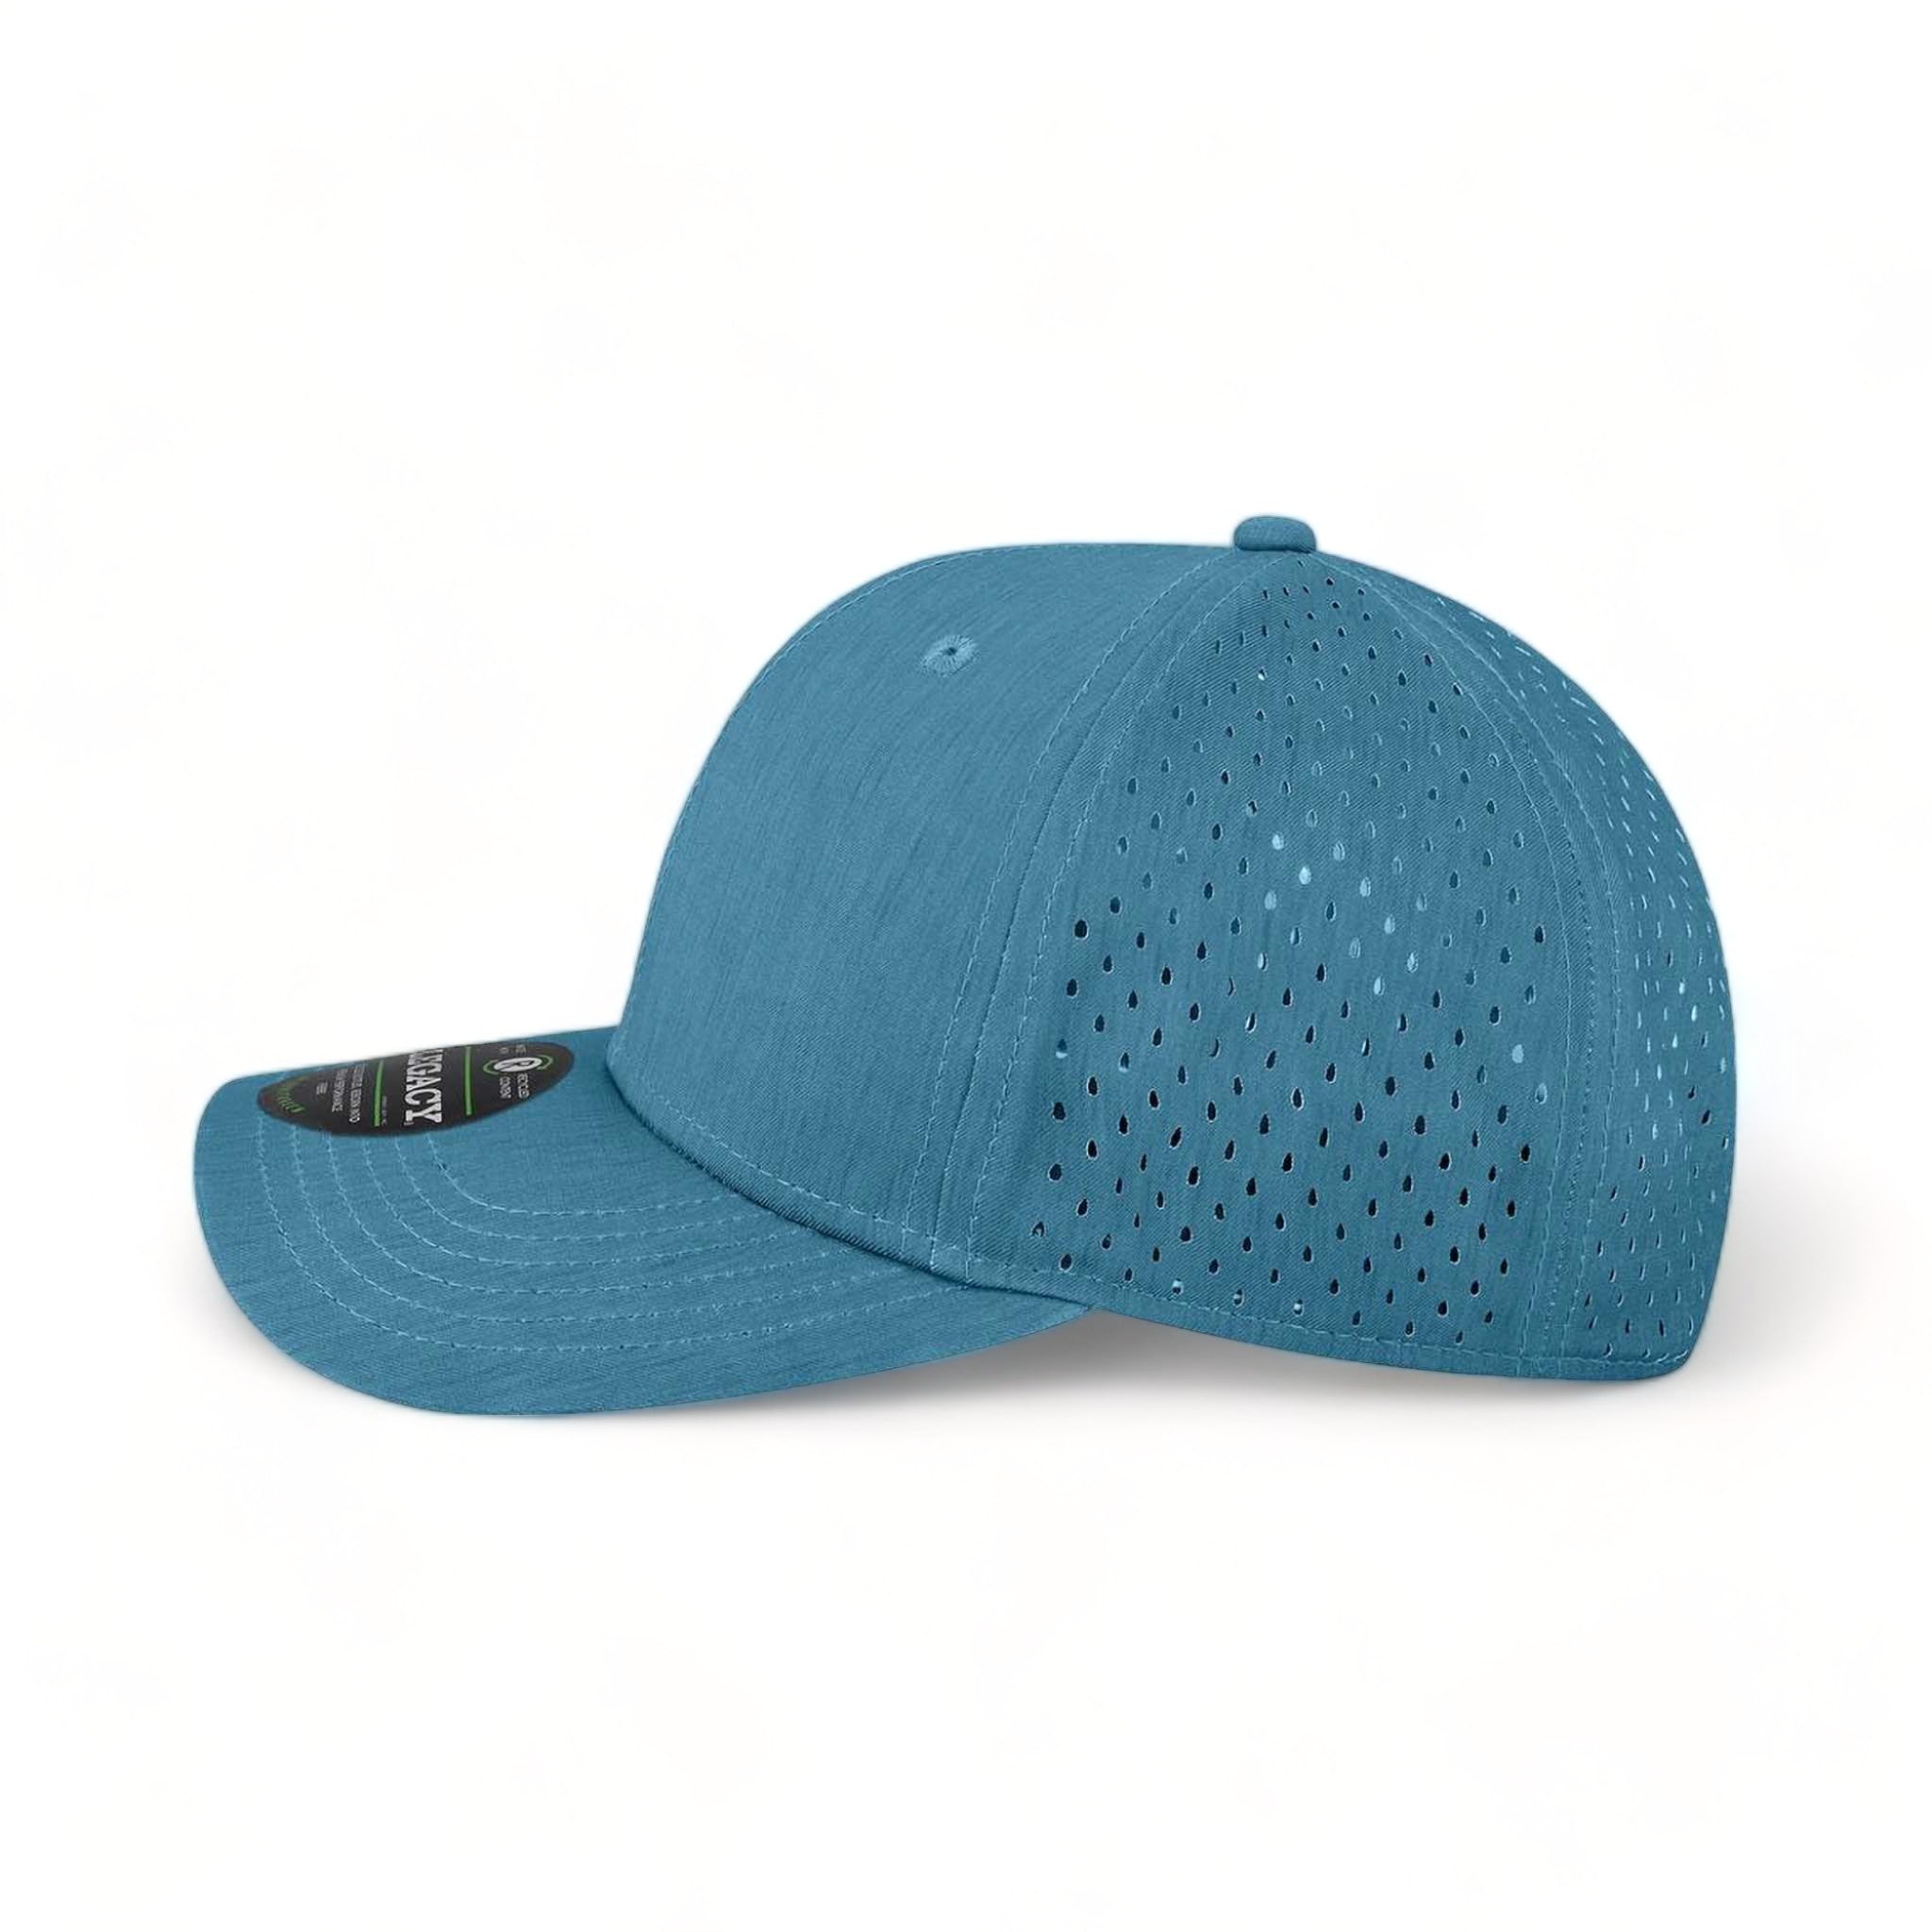 Side view of LEGACY REMPA custom hat in eco marine blue